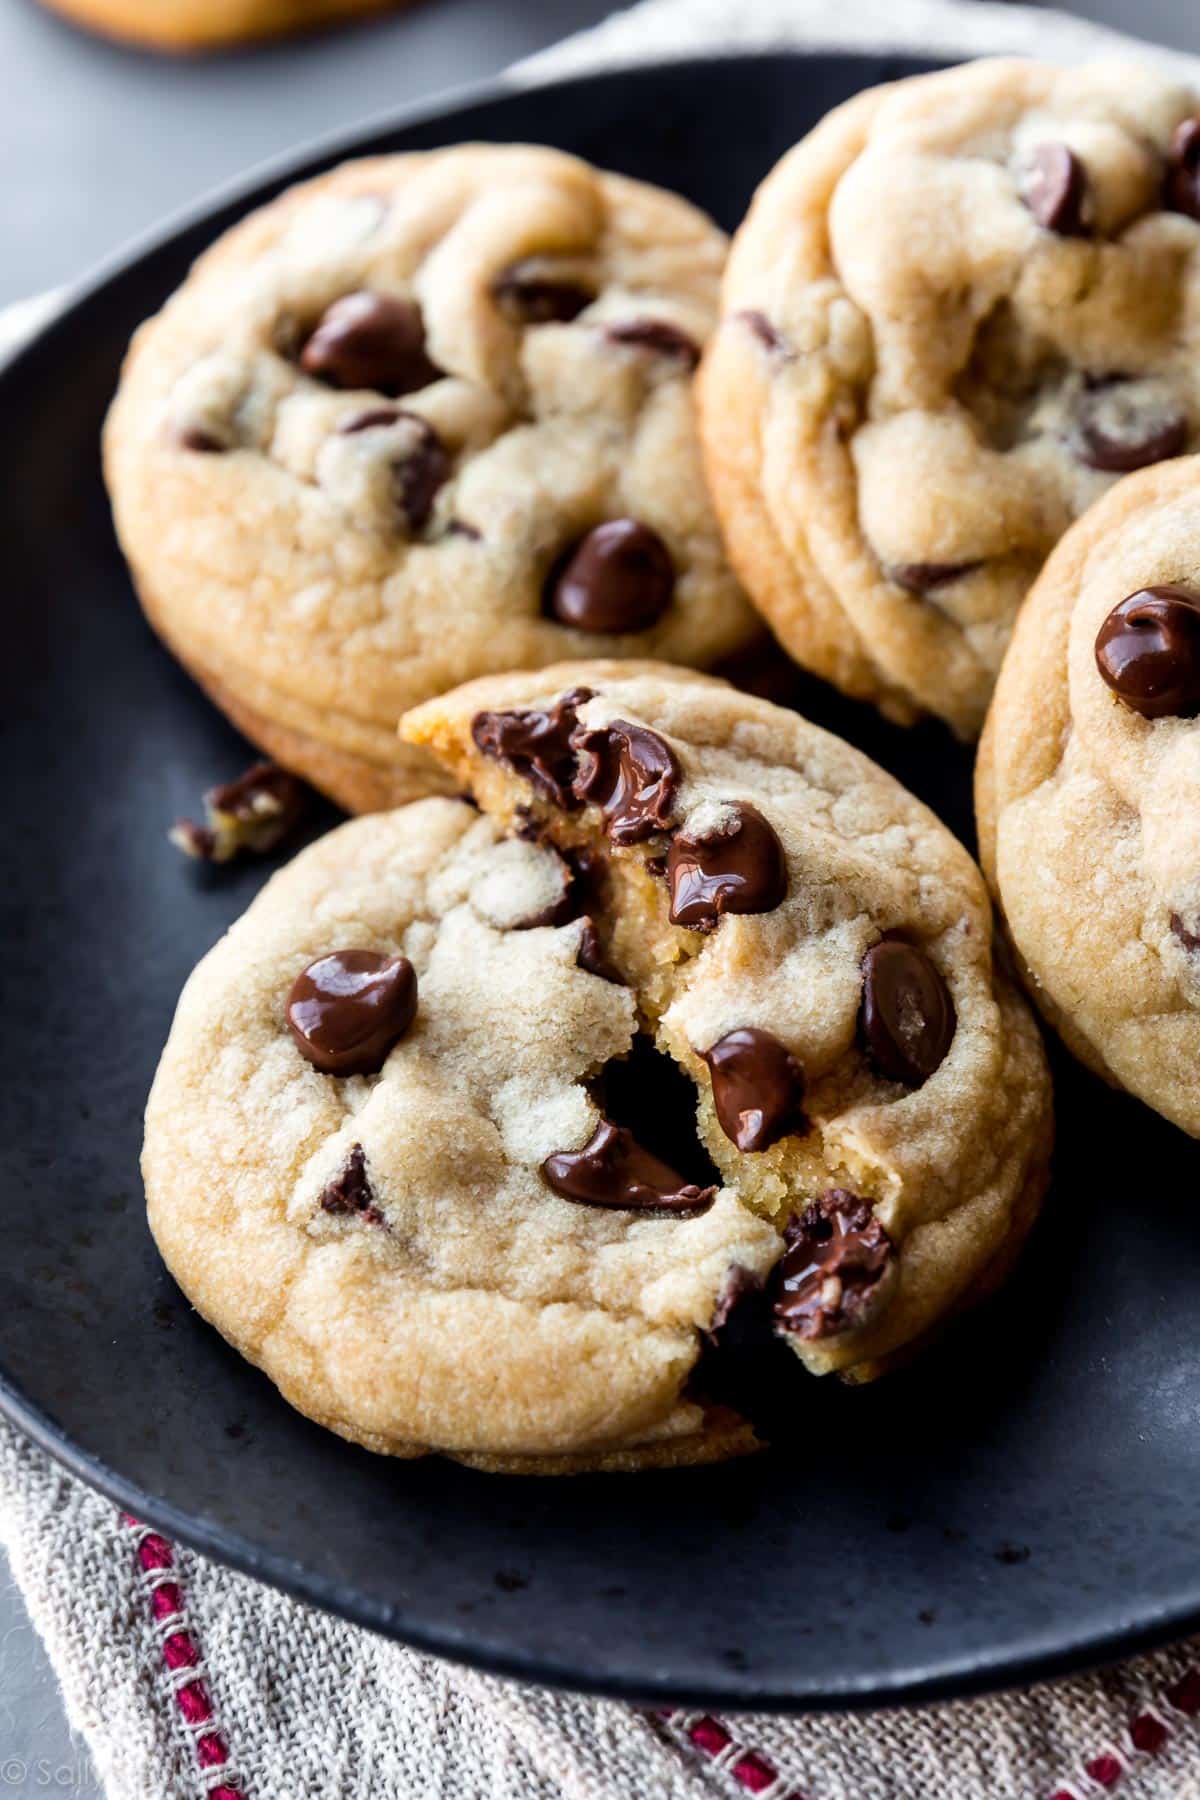 The Best Soft Chocolate Chip Cookies - Sally's Baking Addiction